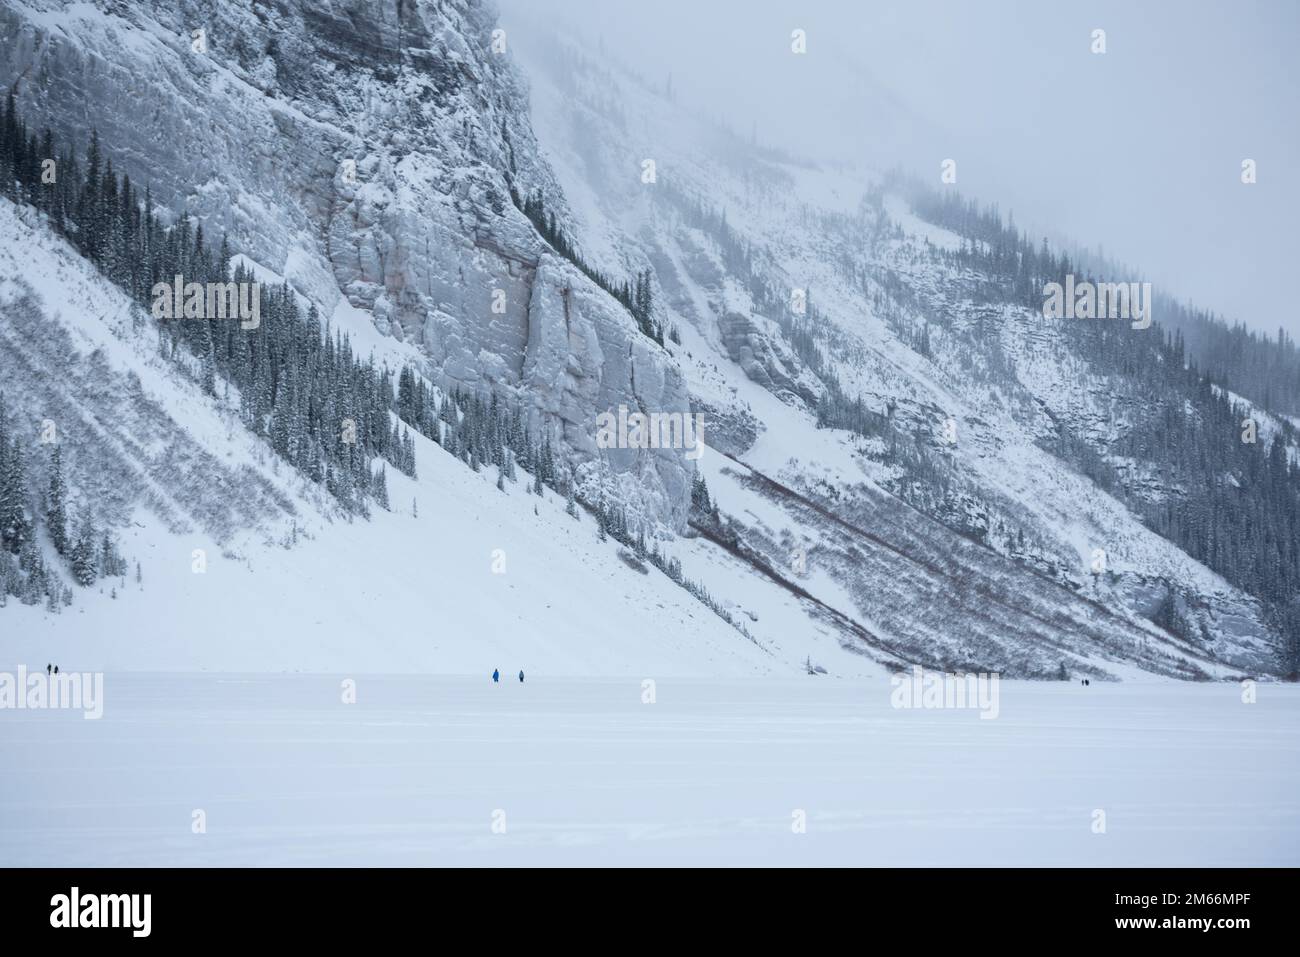 People are dwarfed against the backdrop of mountains at Lake Louise, Banff National Park. Stock Photo